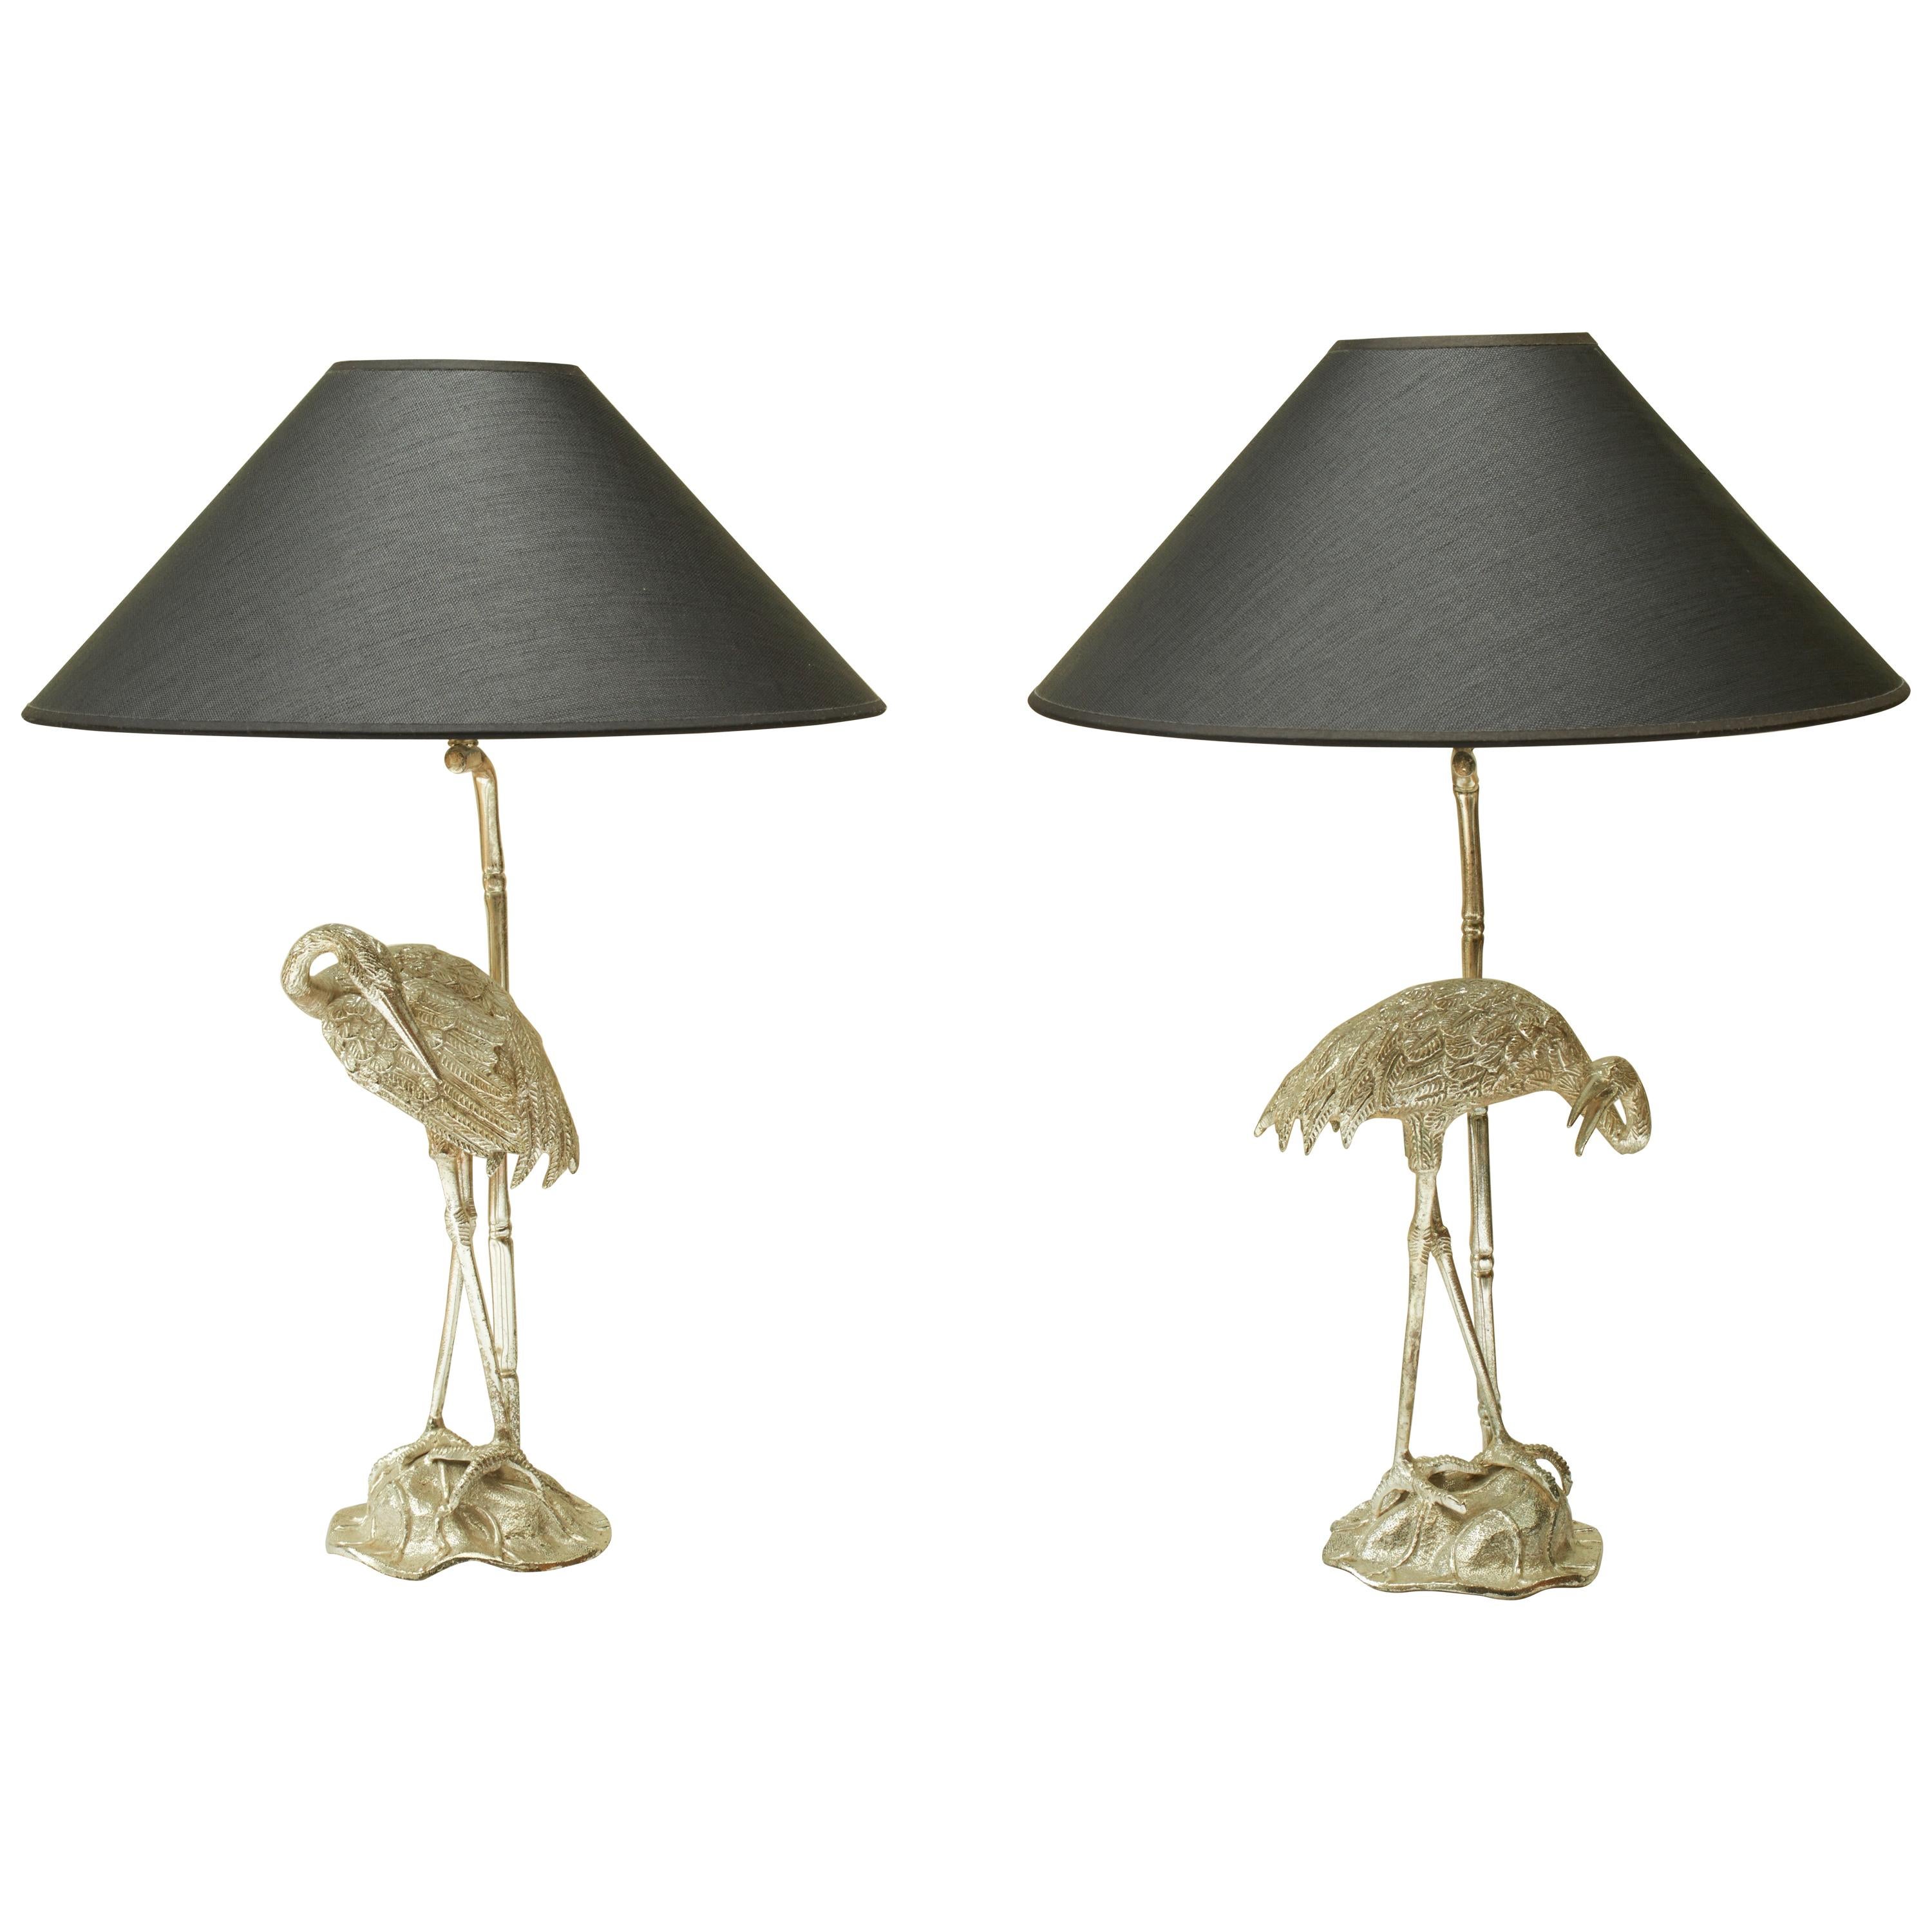 Pair of Maison Baguès Silver Plated Heron Table Lamps